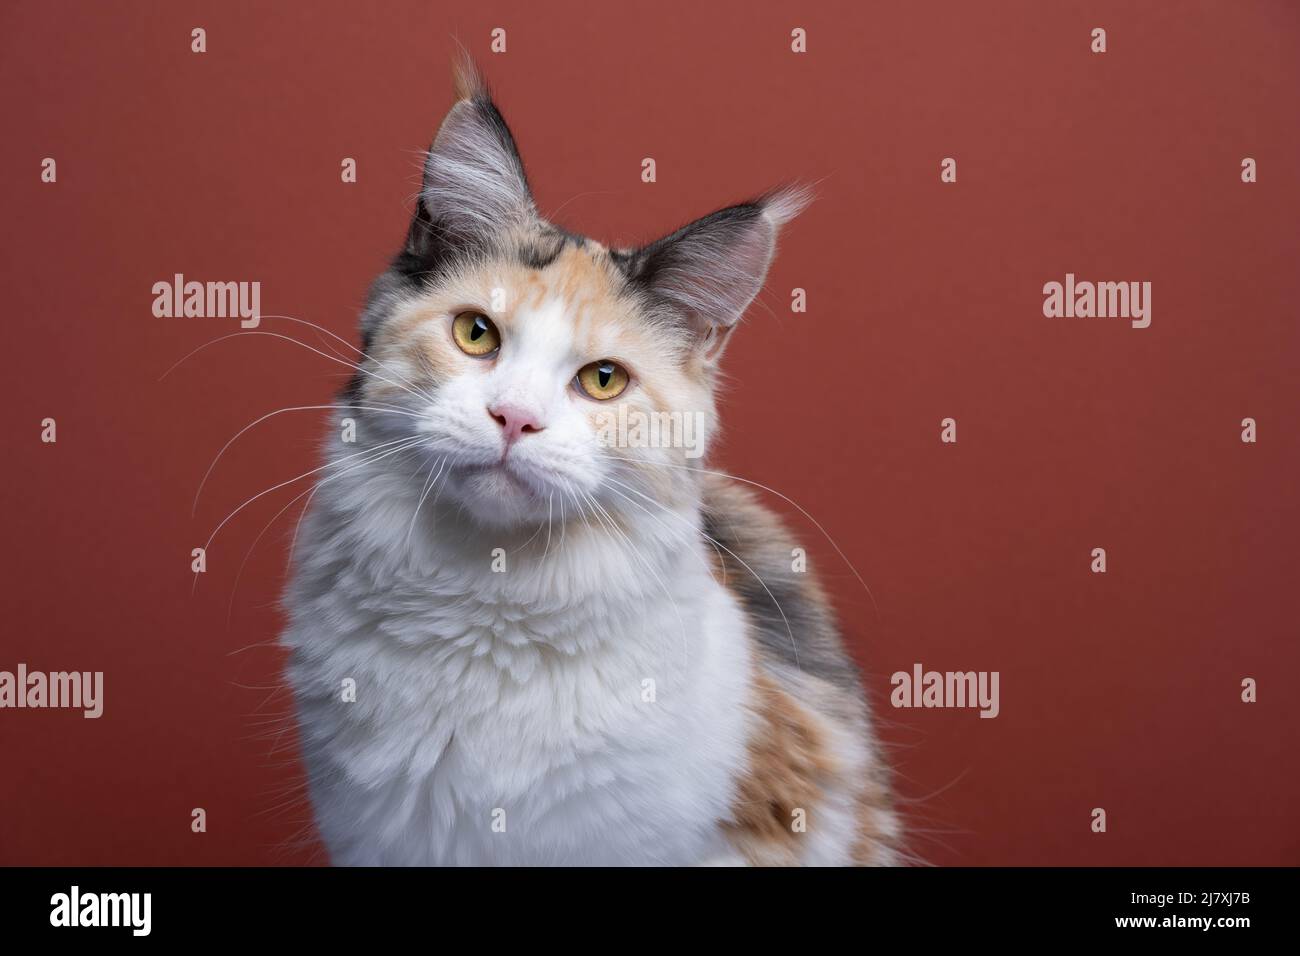 calico white maine coon cat portrait looking at camera on red brown background with copy space Stock Photo